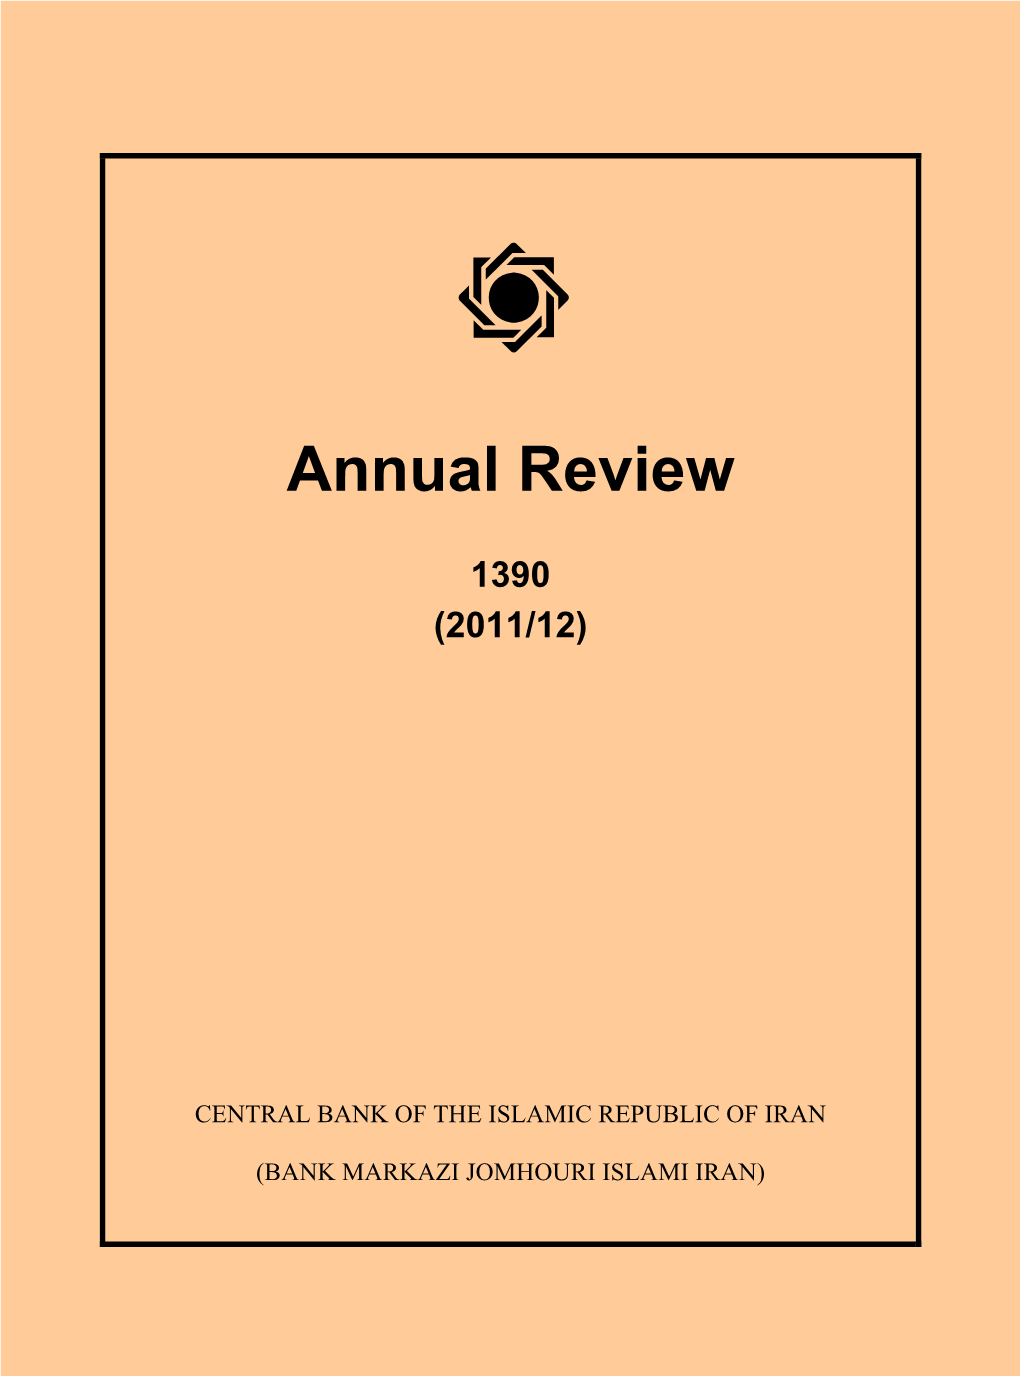 Annual Review 2011/12